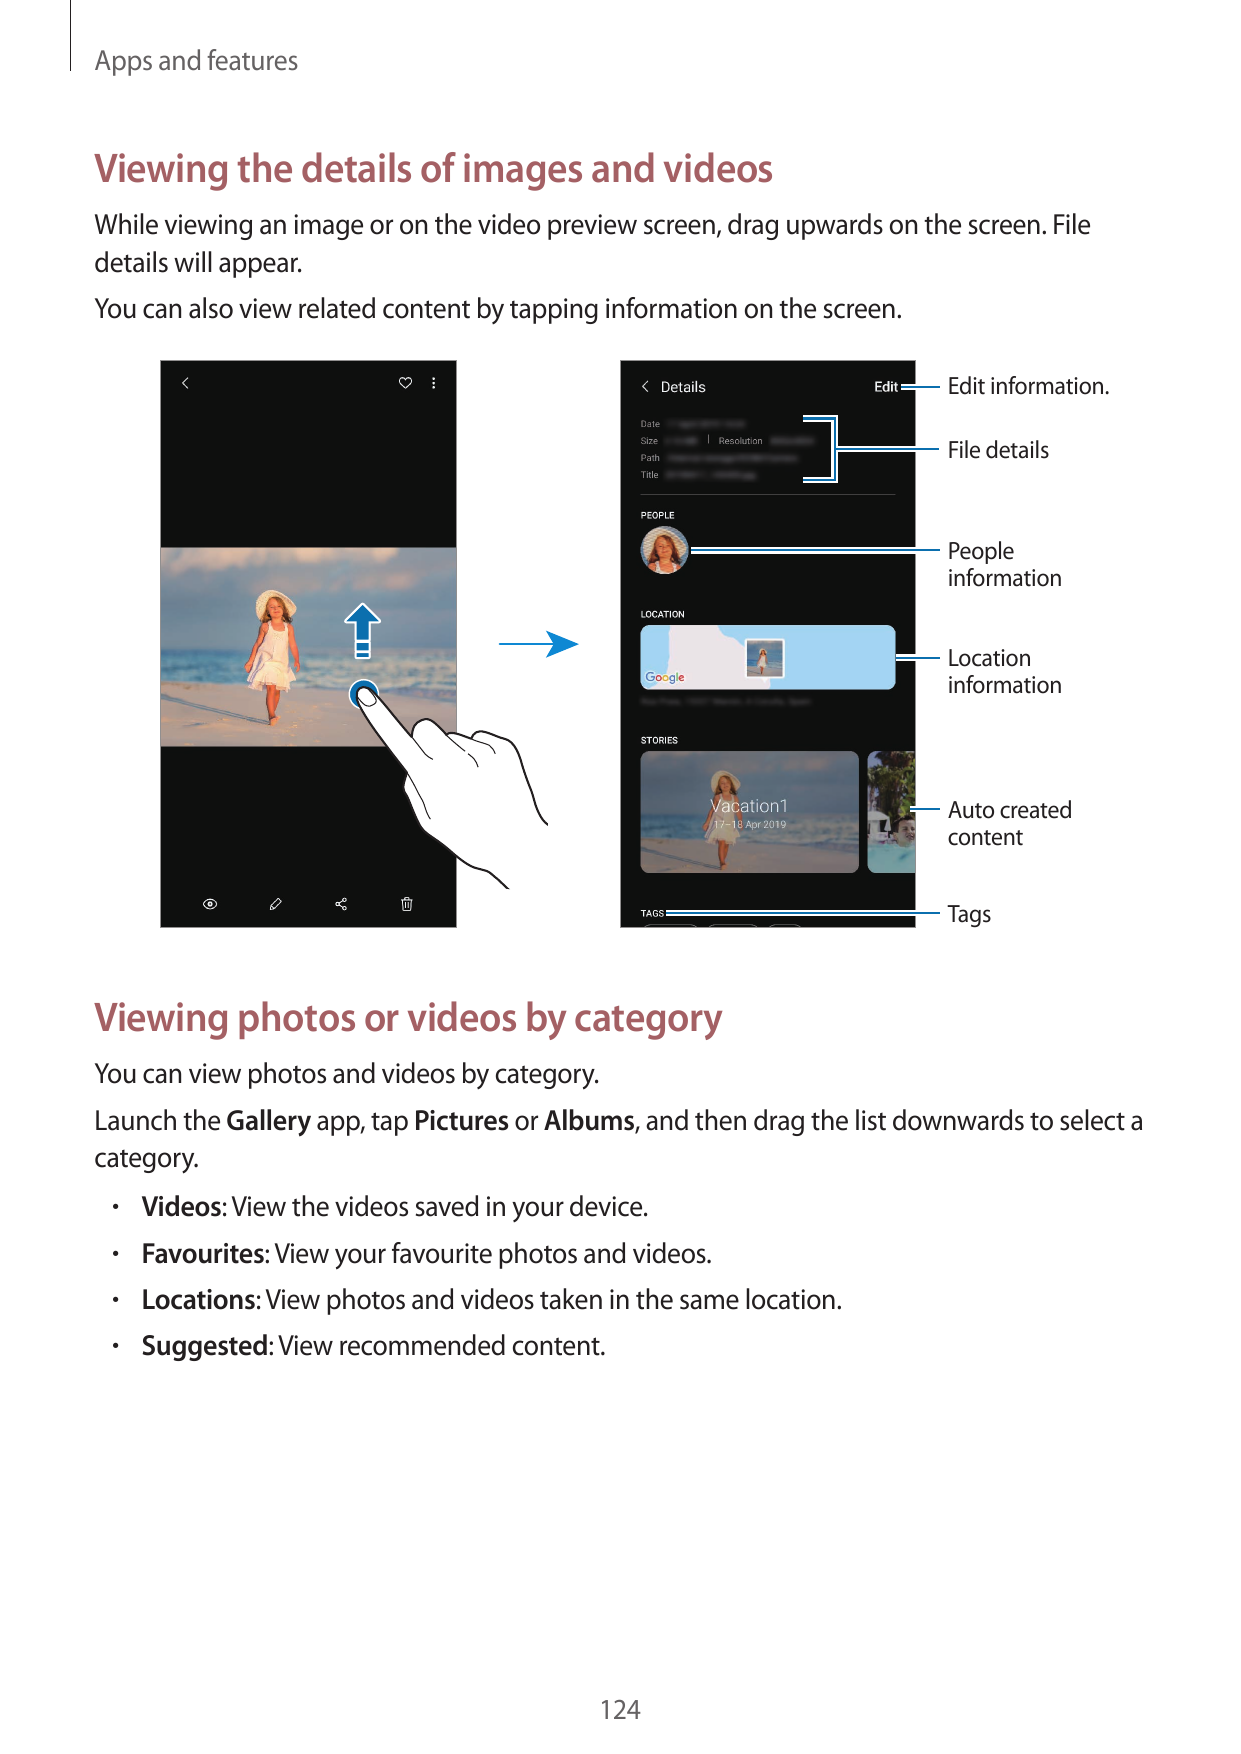 Apps and featuresViewing the details of images and videosWhile viewing an image or on the video preview screen, drag upwards on 